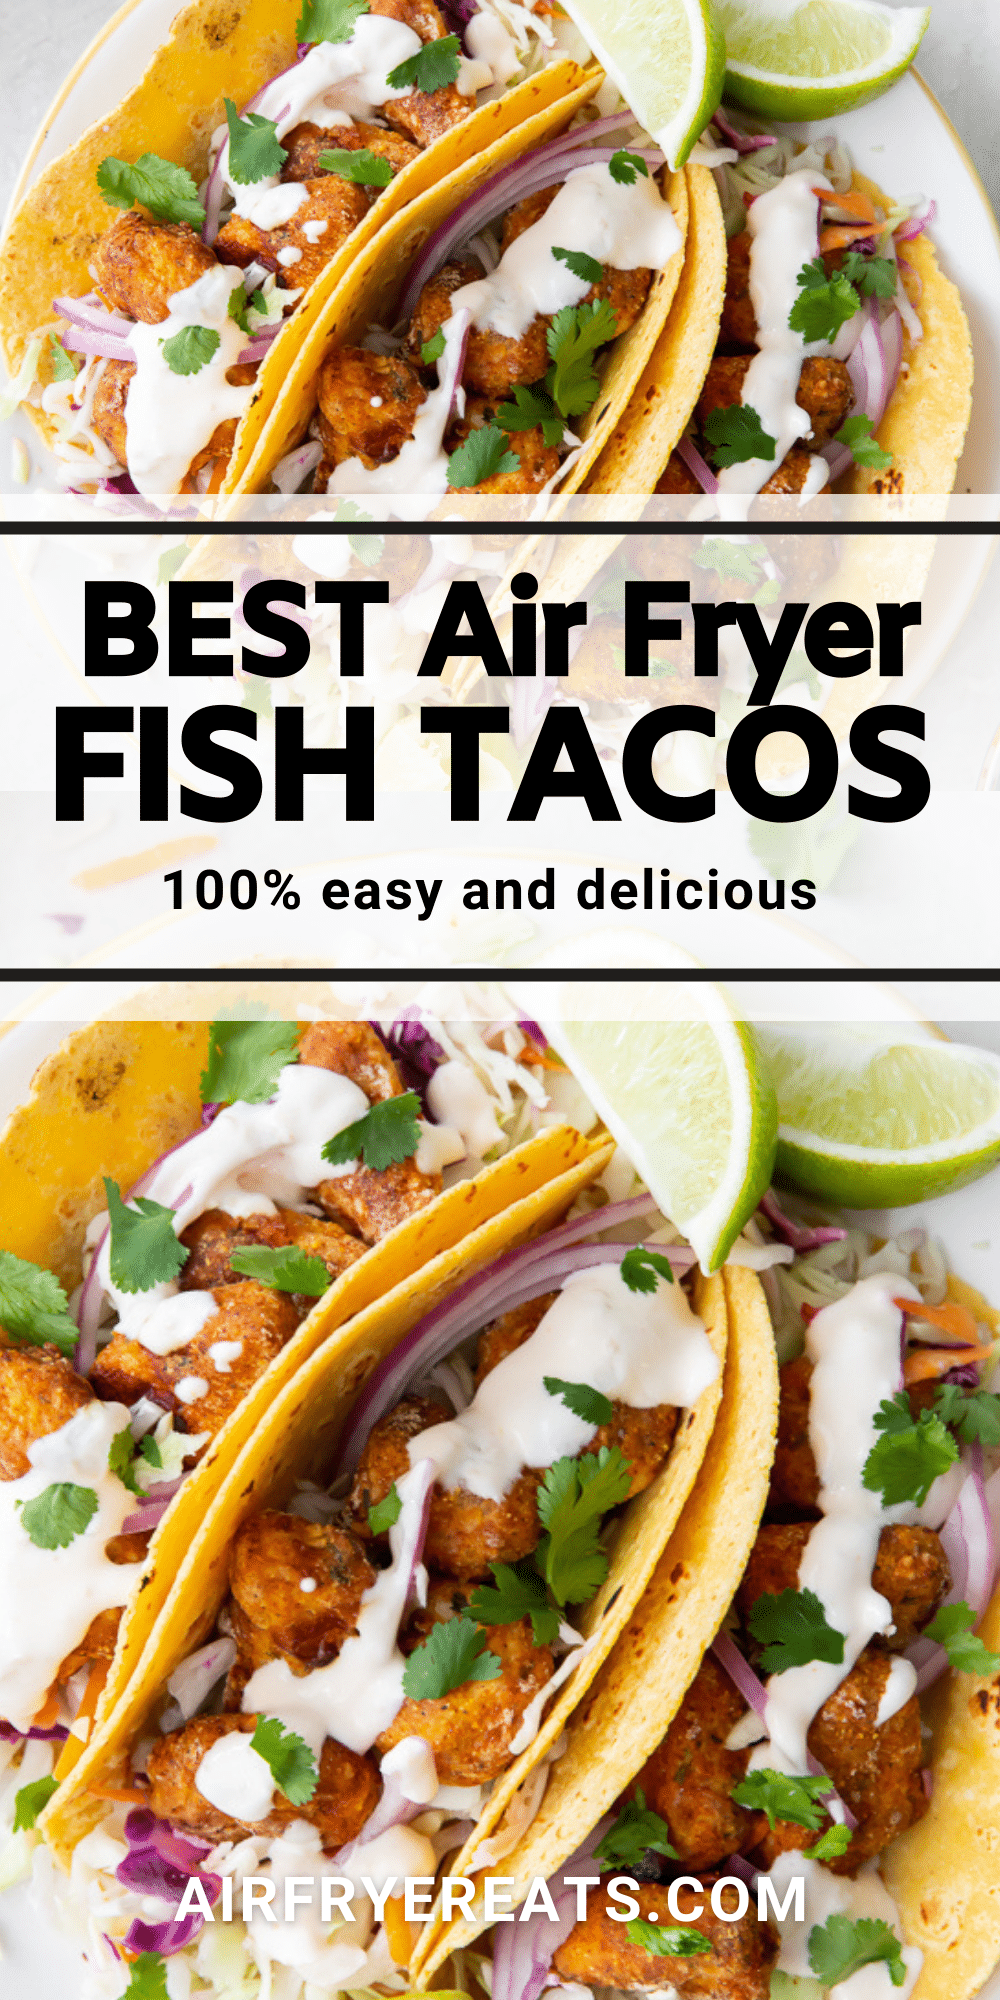 Air Fryer Fish Tacos are tender and juicy white fish with a crispy cornmeal breading. Wrapped in tortillas and topped with authentic Mexican taco toppings, including a delicious garlic lime crema sauce, these fish tacos will be the best you've ever had. #fishtacos #airfryerfish via @vegetarianmamma